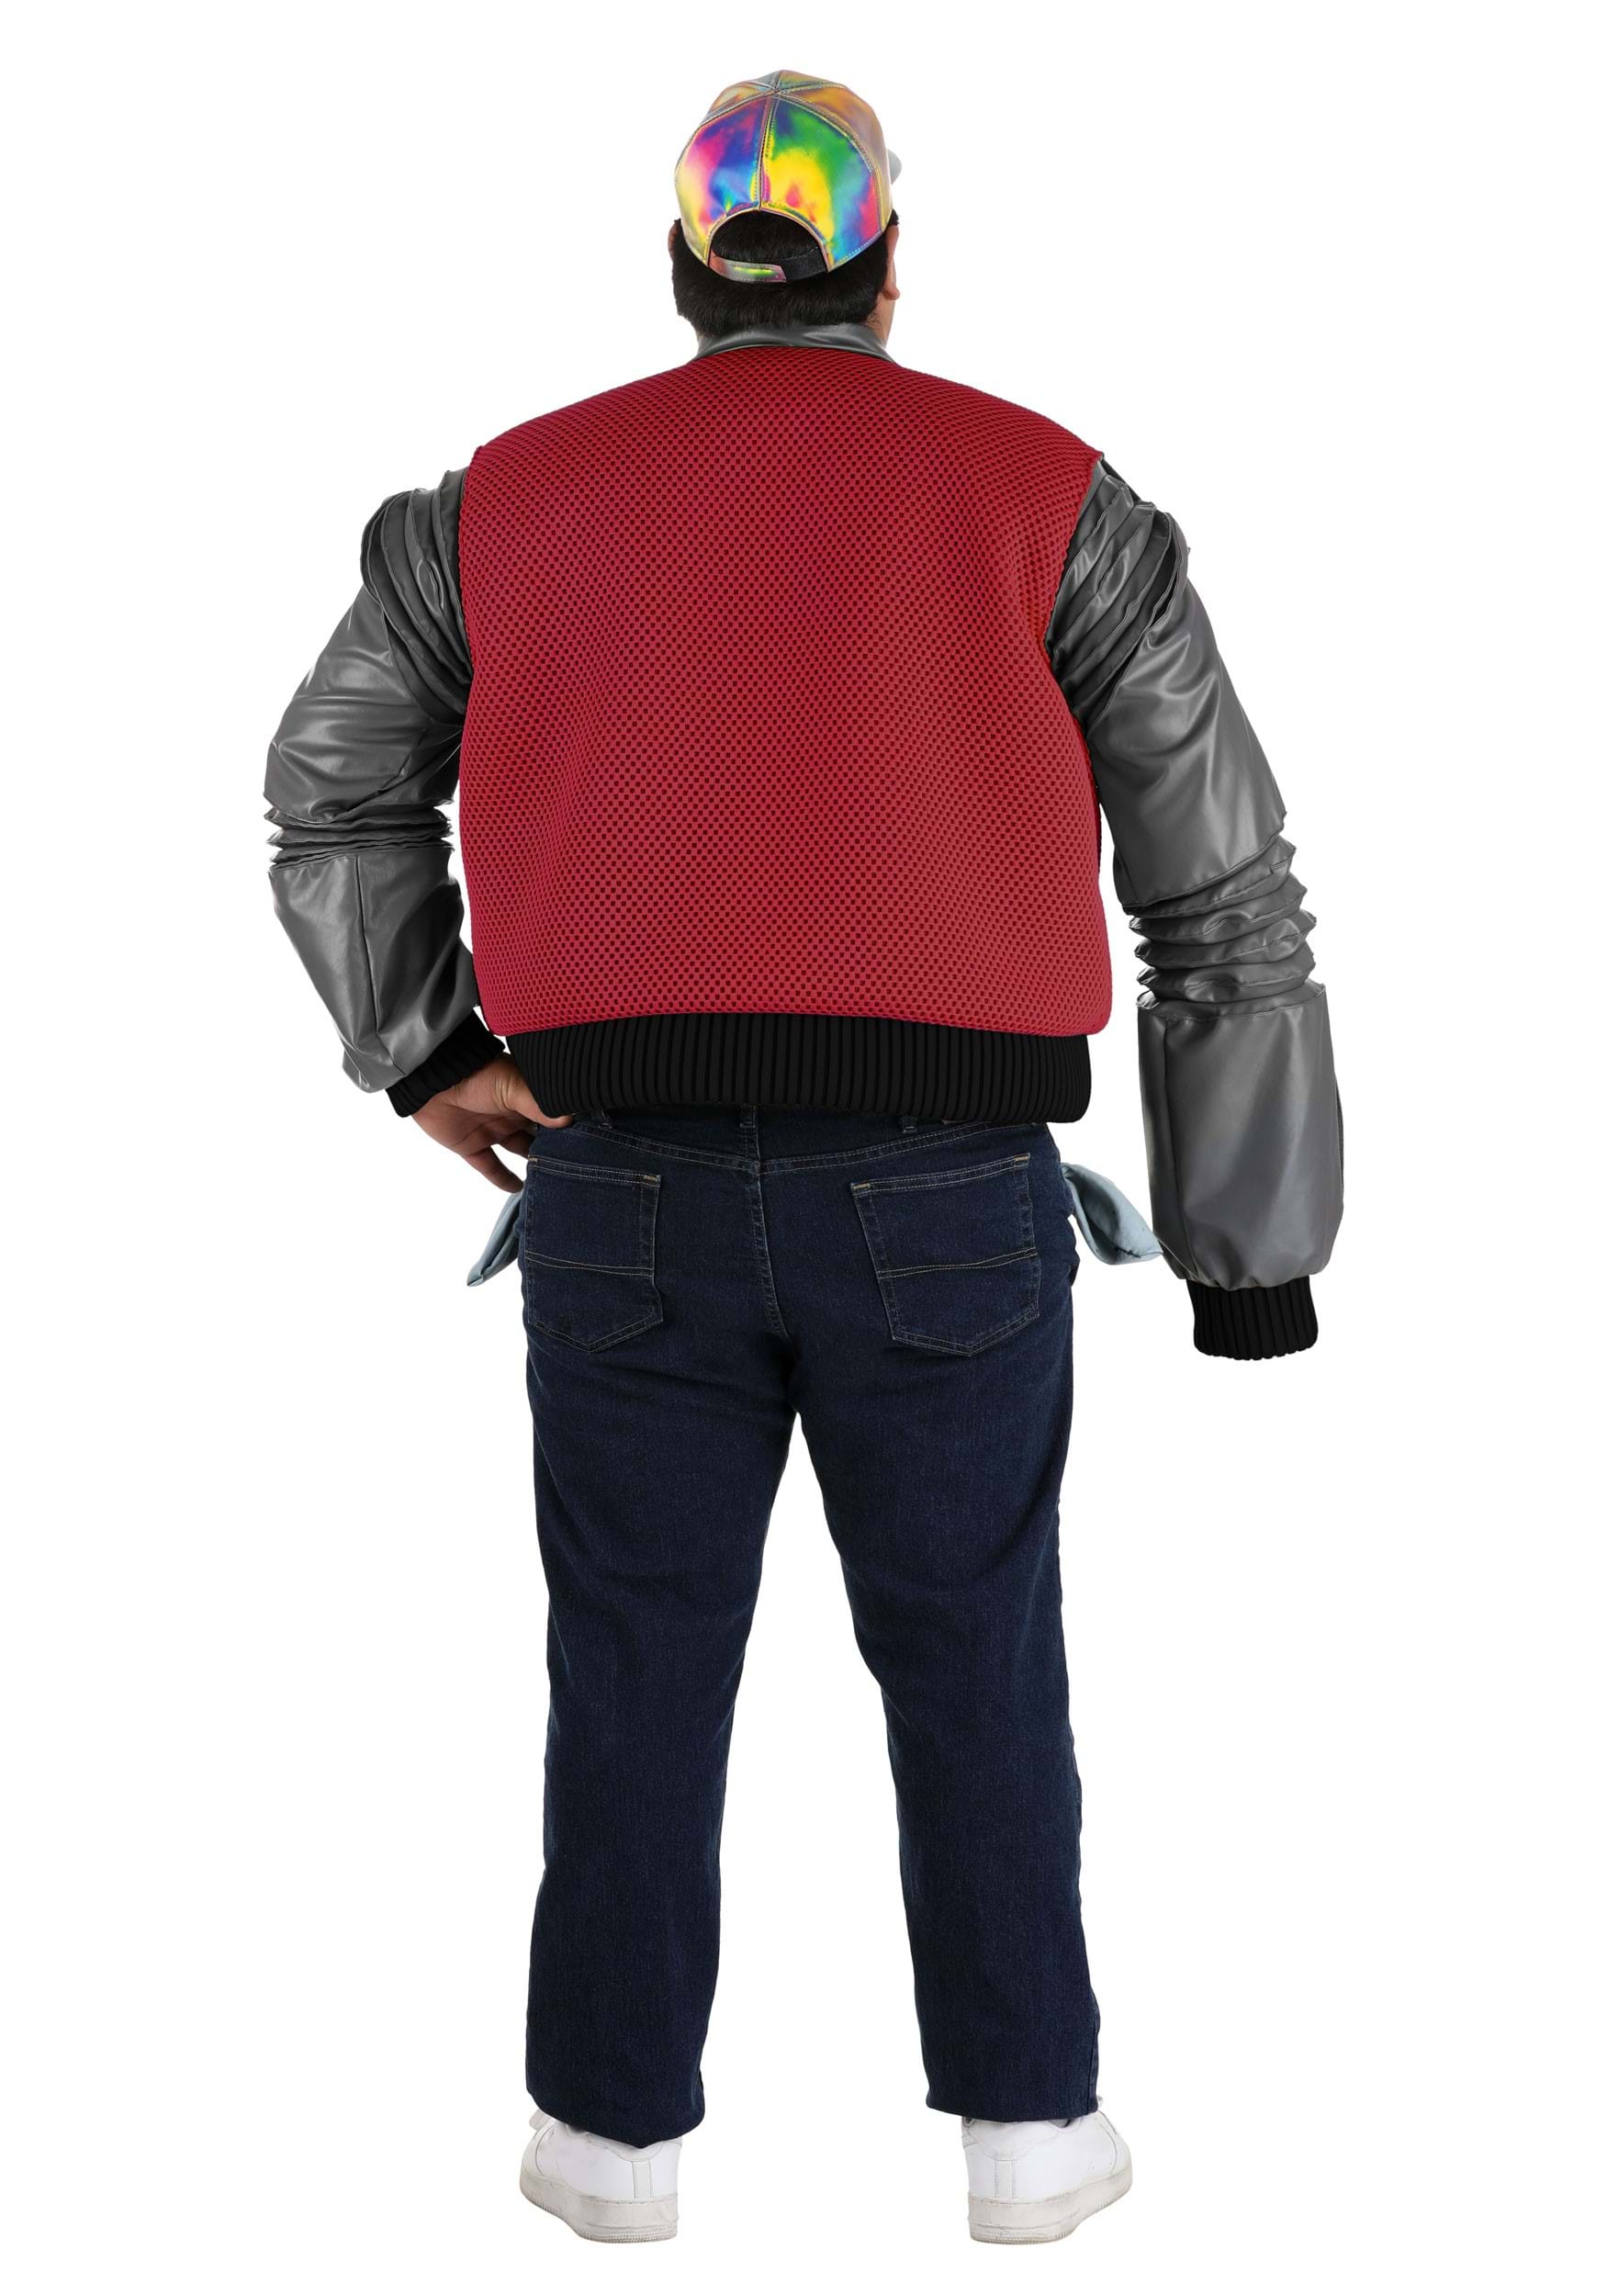 Plus Size Men's Authentic Marty McFly Jacket Fancy Dress Costume From Back To The Future